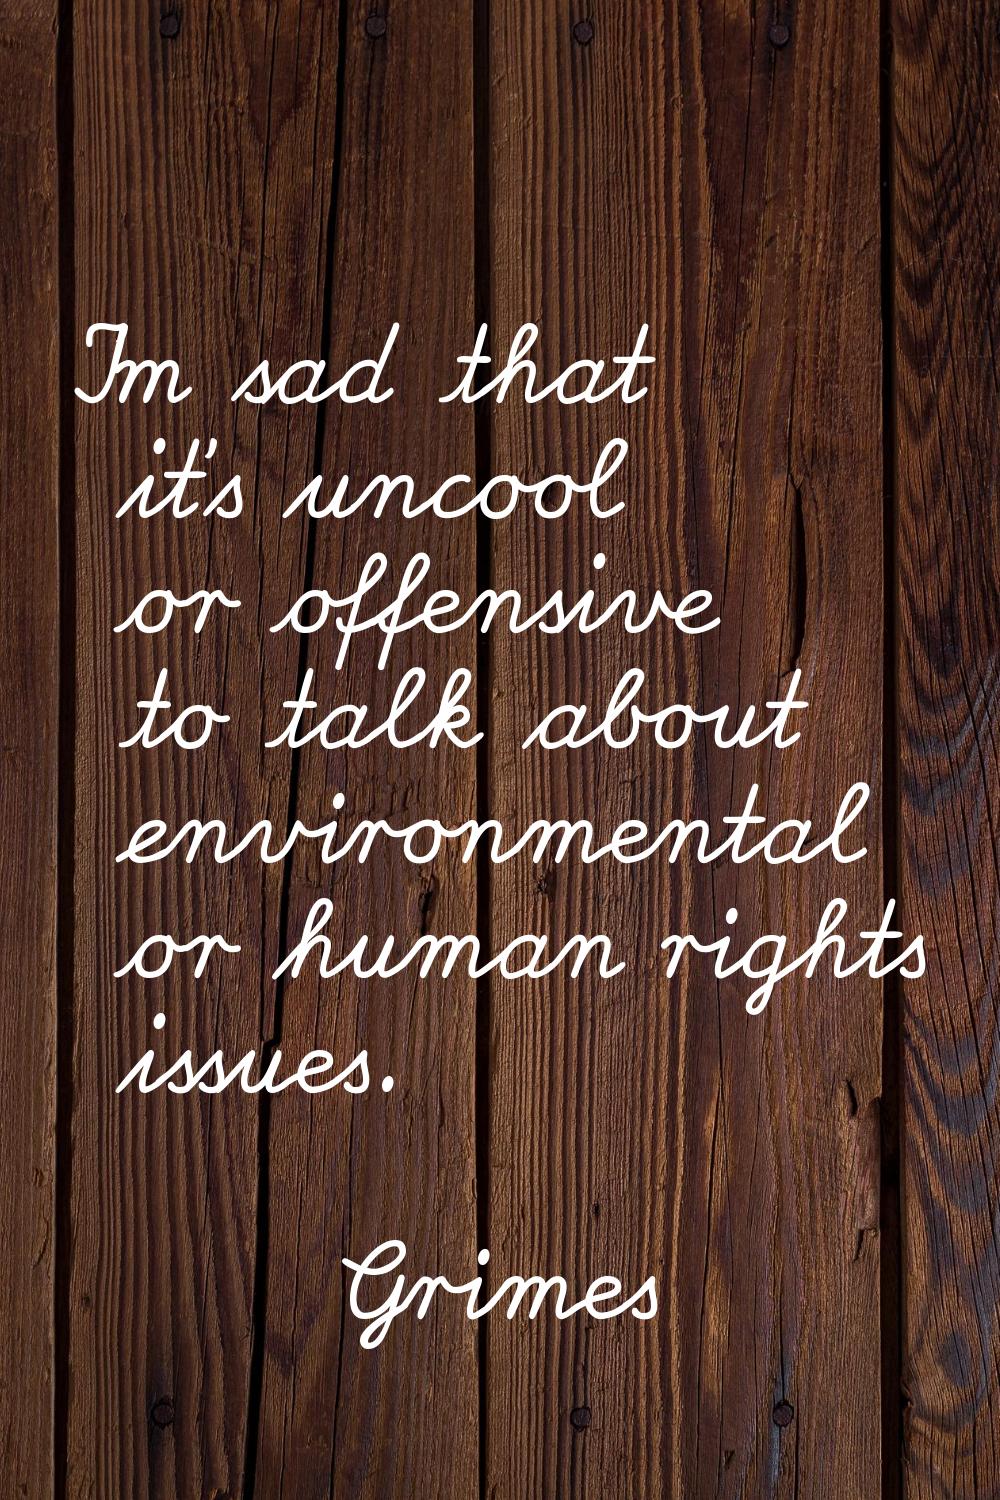 I'm sad that it's uncool or offensive to talk about environmental or human rights issues.